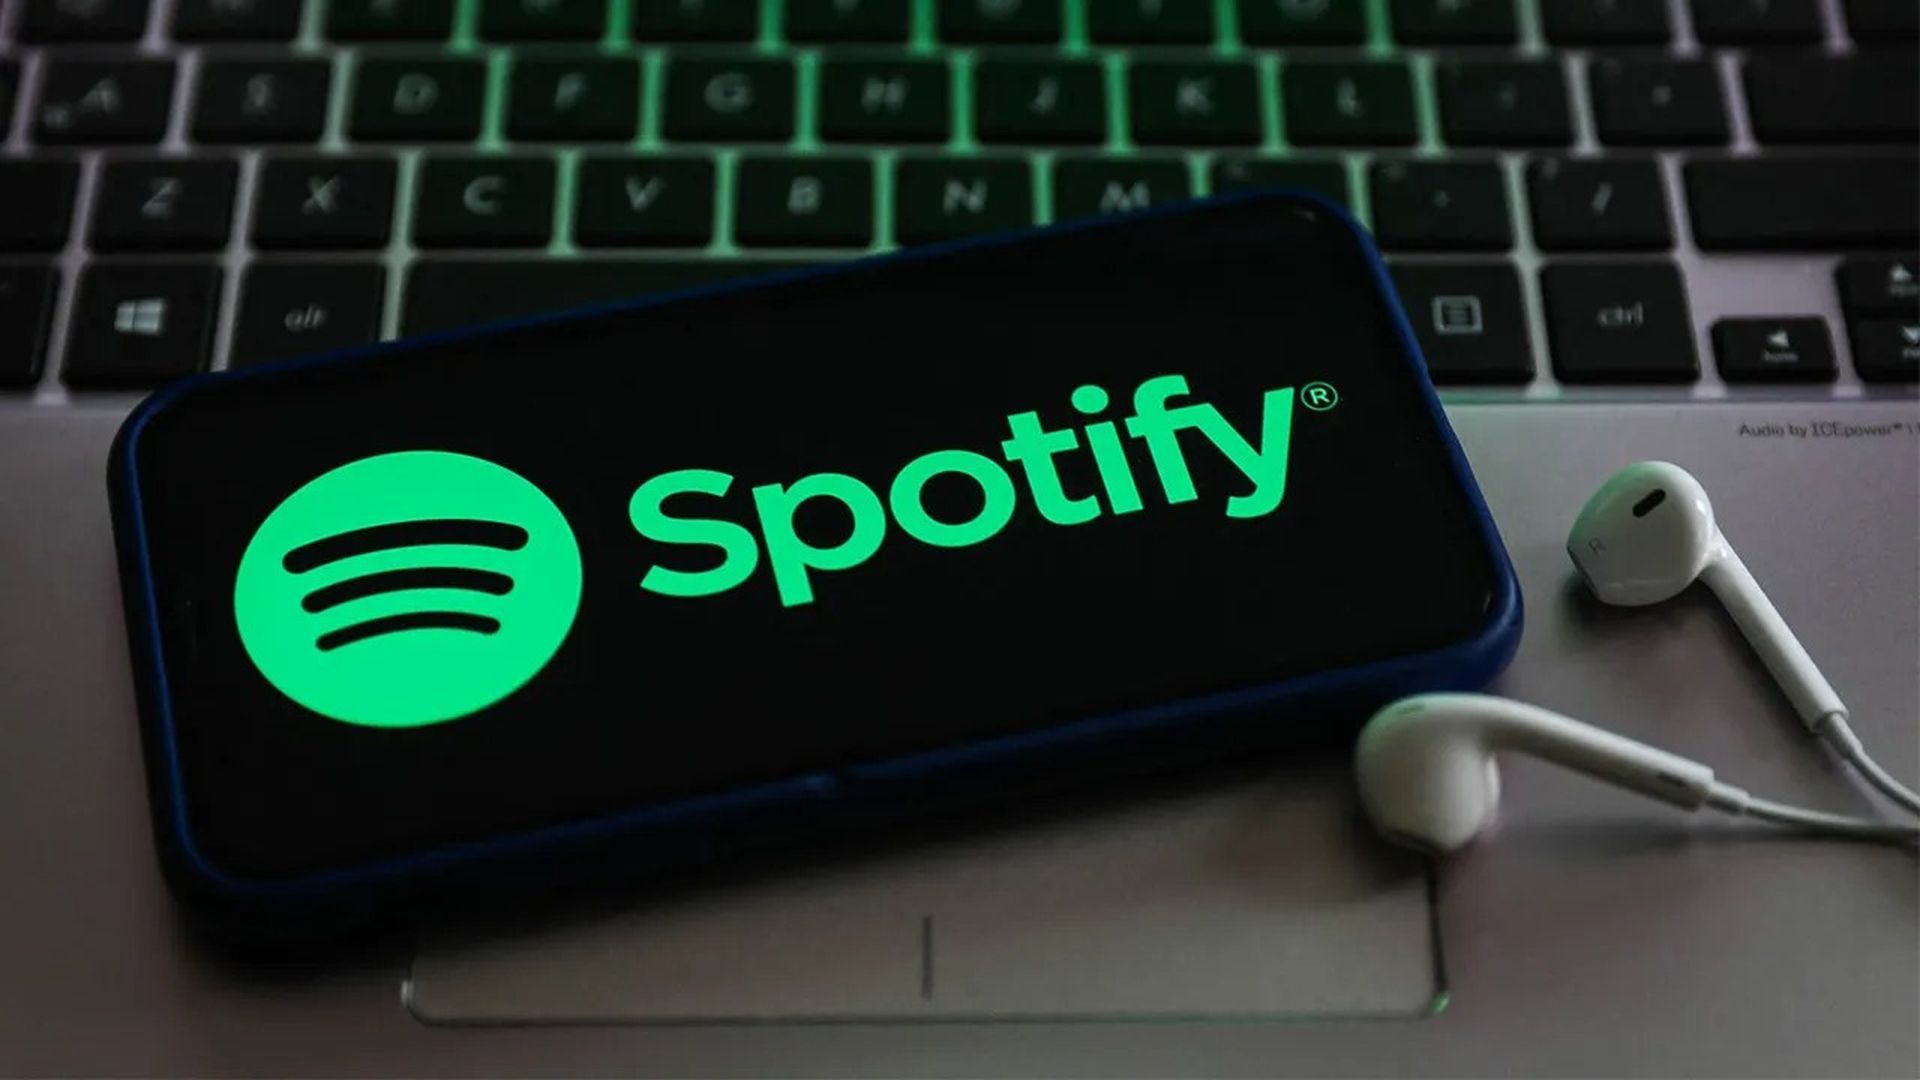 Spotify Community is in the works, it is a new feature that would allow mobile users to see what music their friends are listening to in real time.